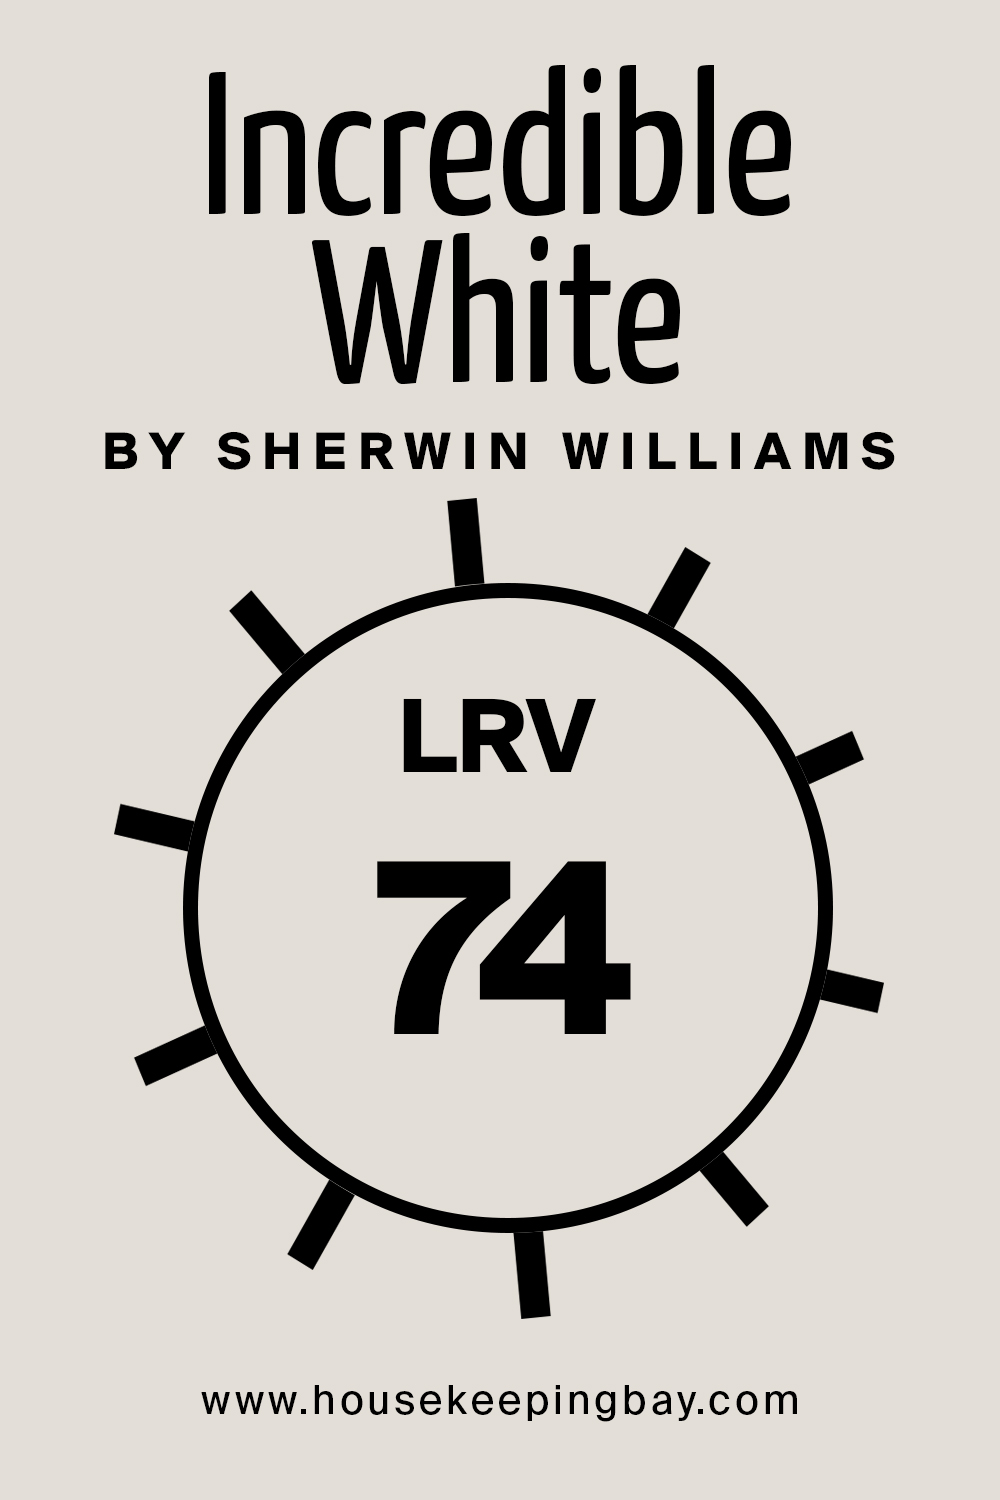 Incredible White by Sherwin Williams. LRV – 74